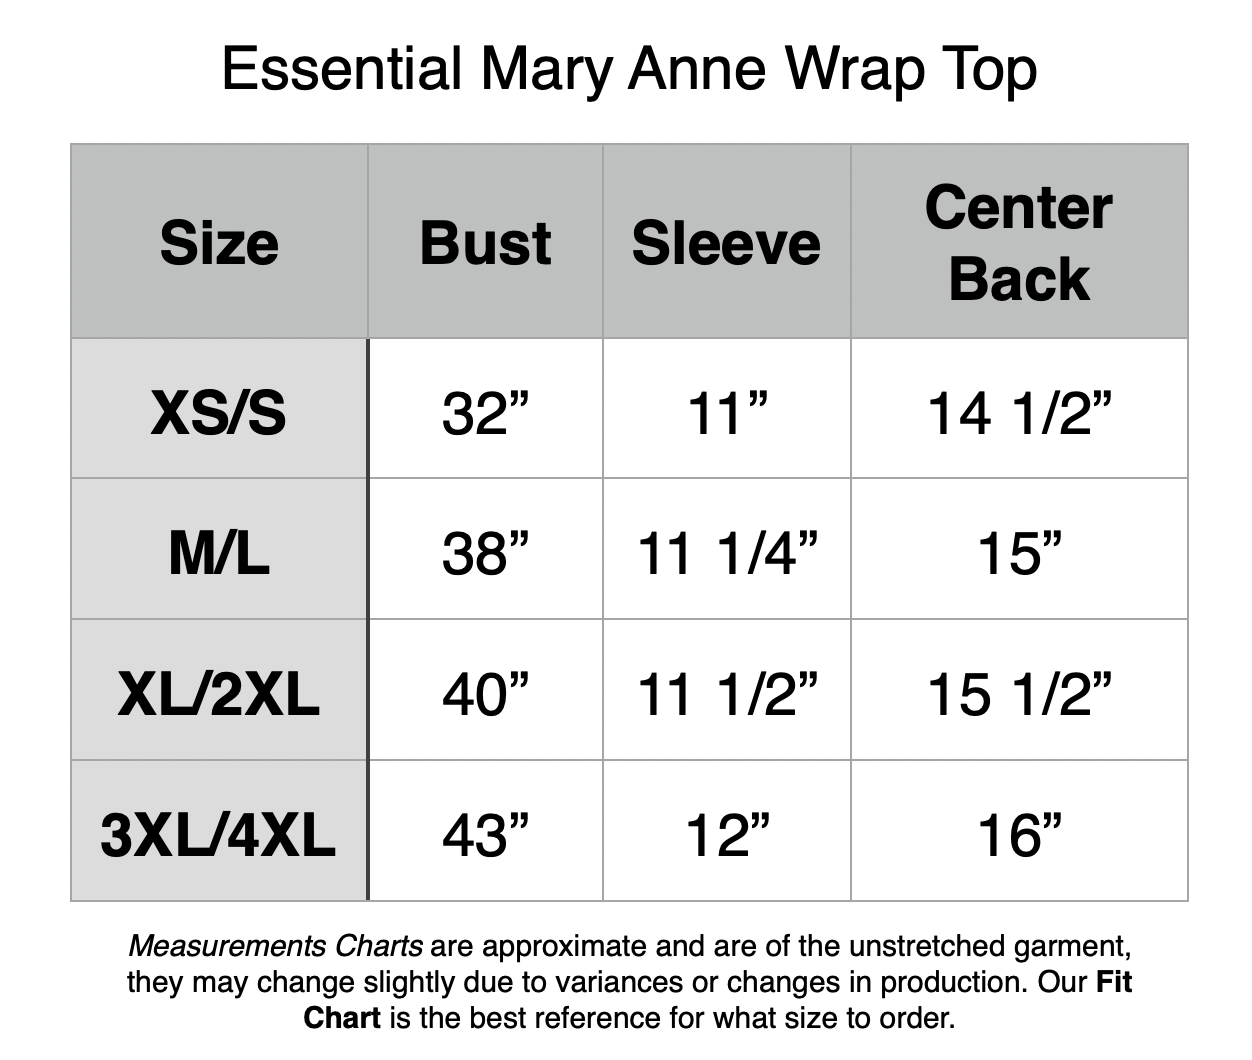 Essential Mary Anne Wrap Top: XS/S - 32” Bust, 11” Sleeve, 14.5” Center Back. M/L - 38” Bust, 11.25” Sleeve, 15” Center Back. XL/2XL - 40” Bust, 11.5” Sleeve, 15.5” Center Back. 3XL/4XL - 43” Bust, 12” Sleeve, 16” Center Back.